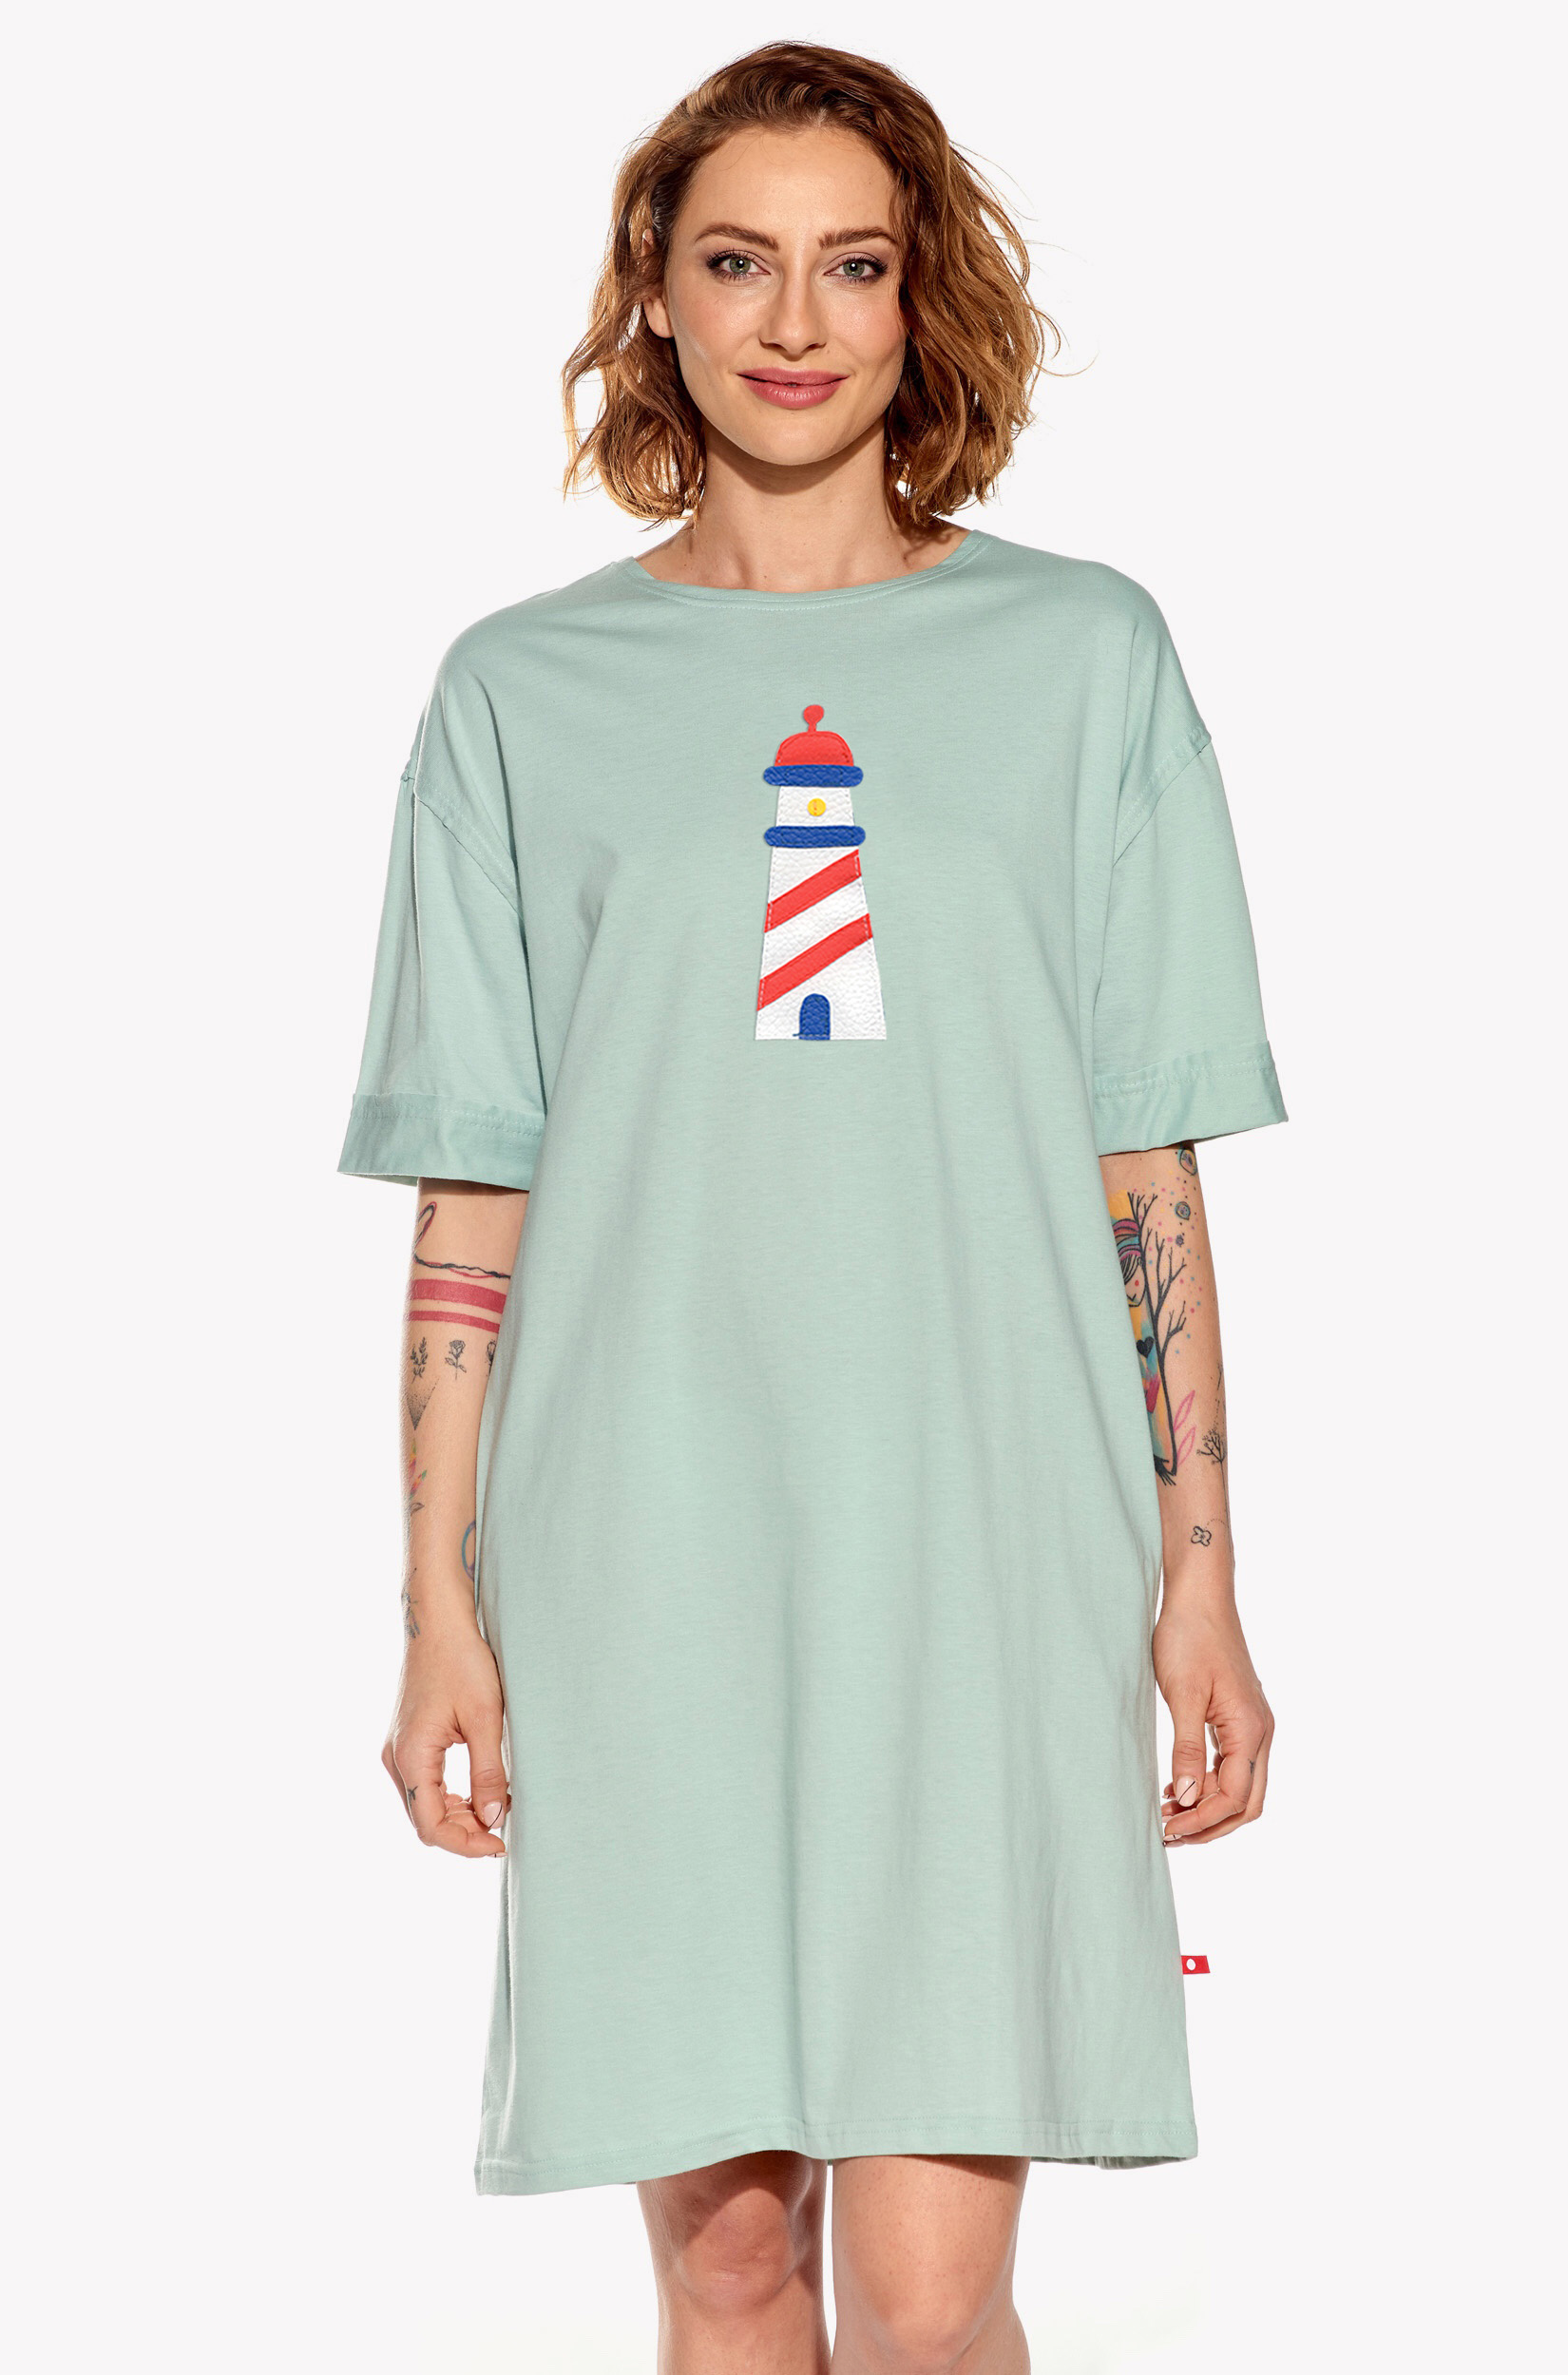 Dresses with lighthouse